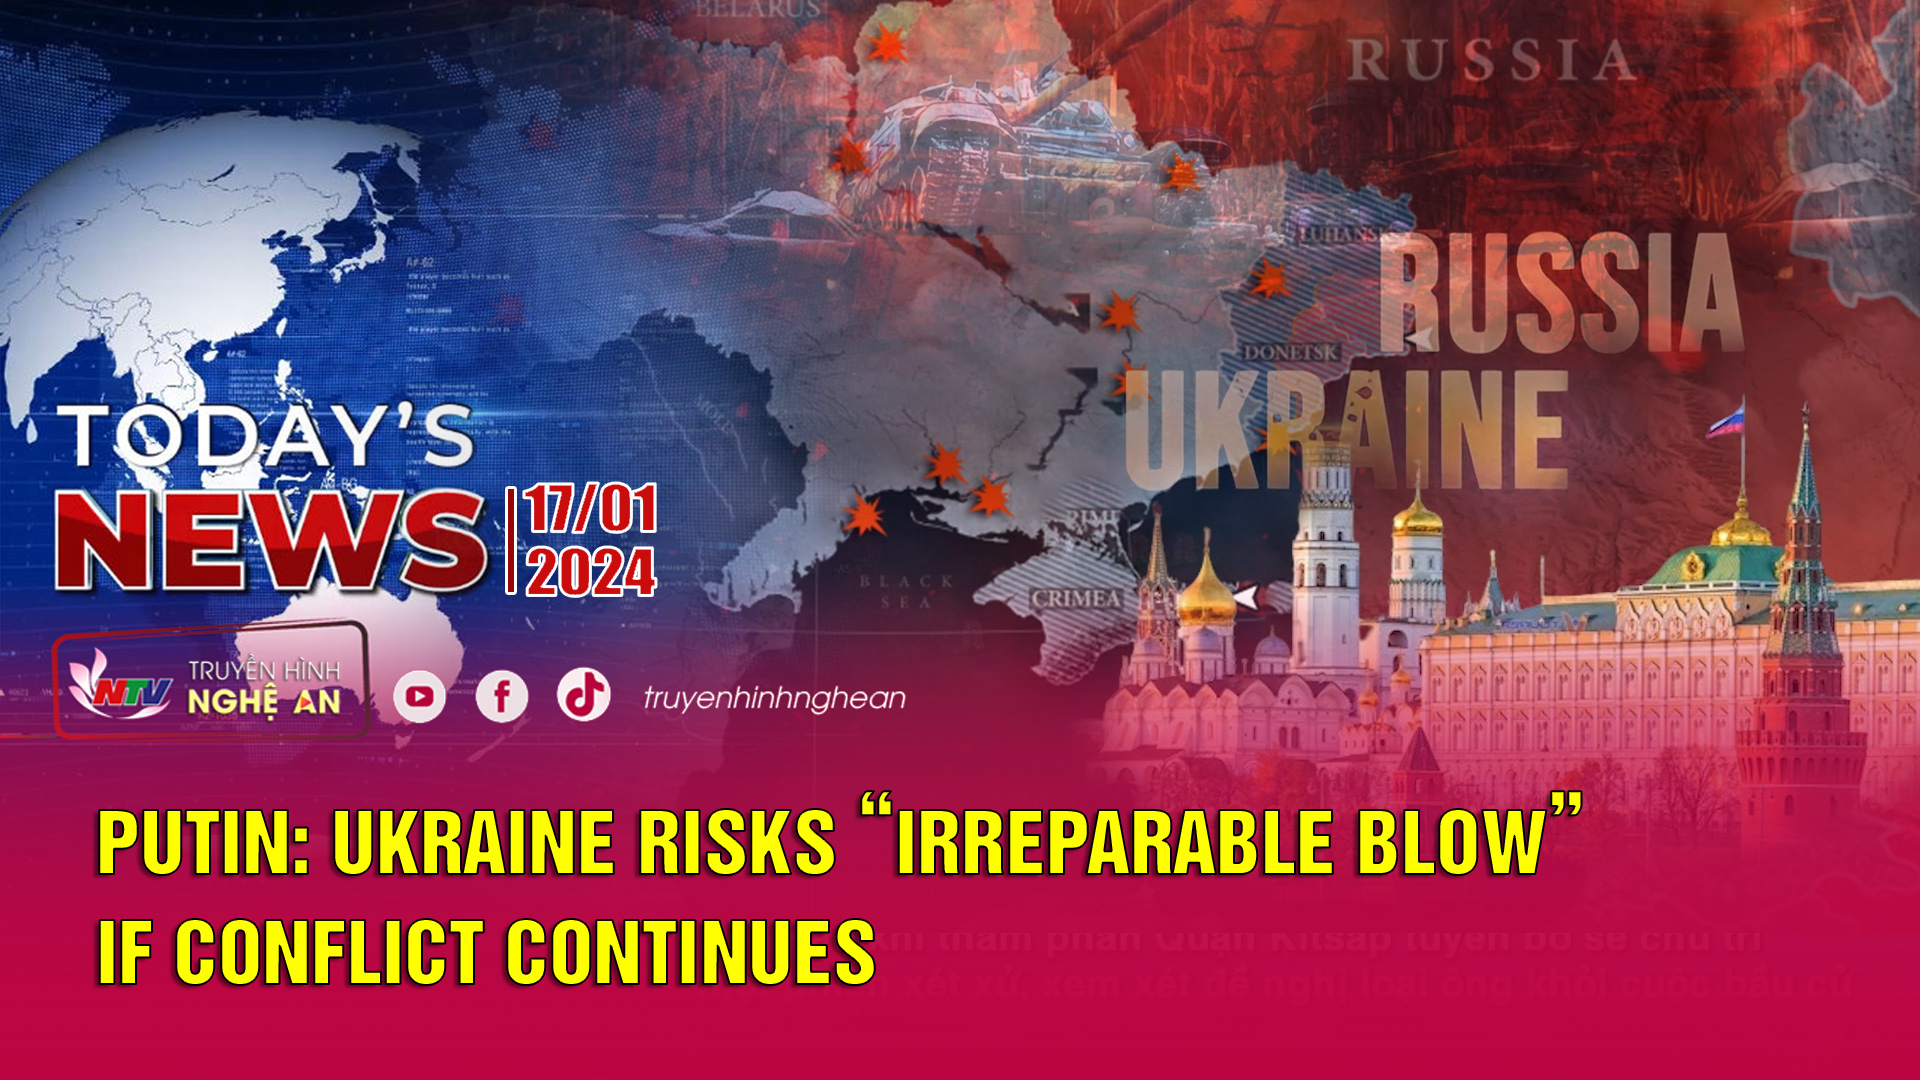 Today's News - 17/01/2024: Putin: Ukraine Risks "Irreparable Blow" If Conflict Continues